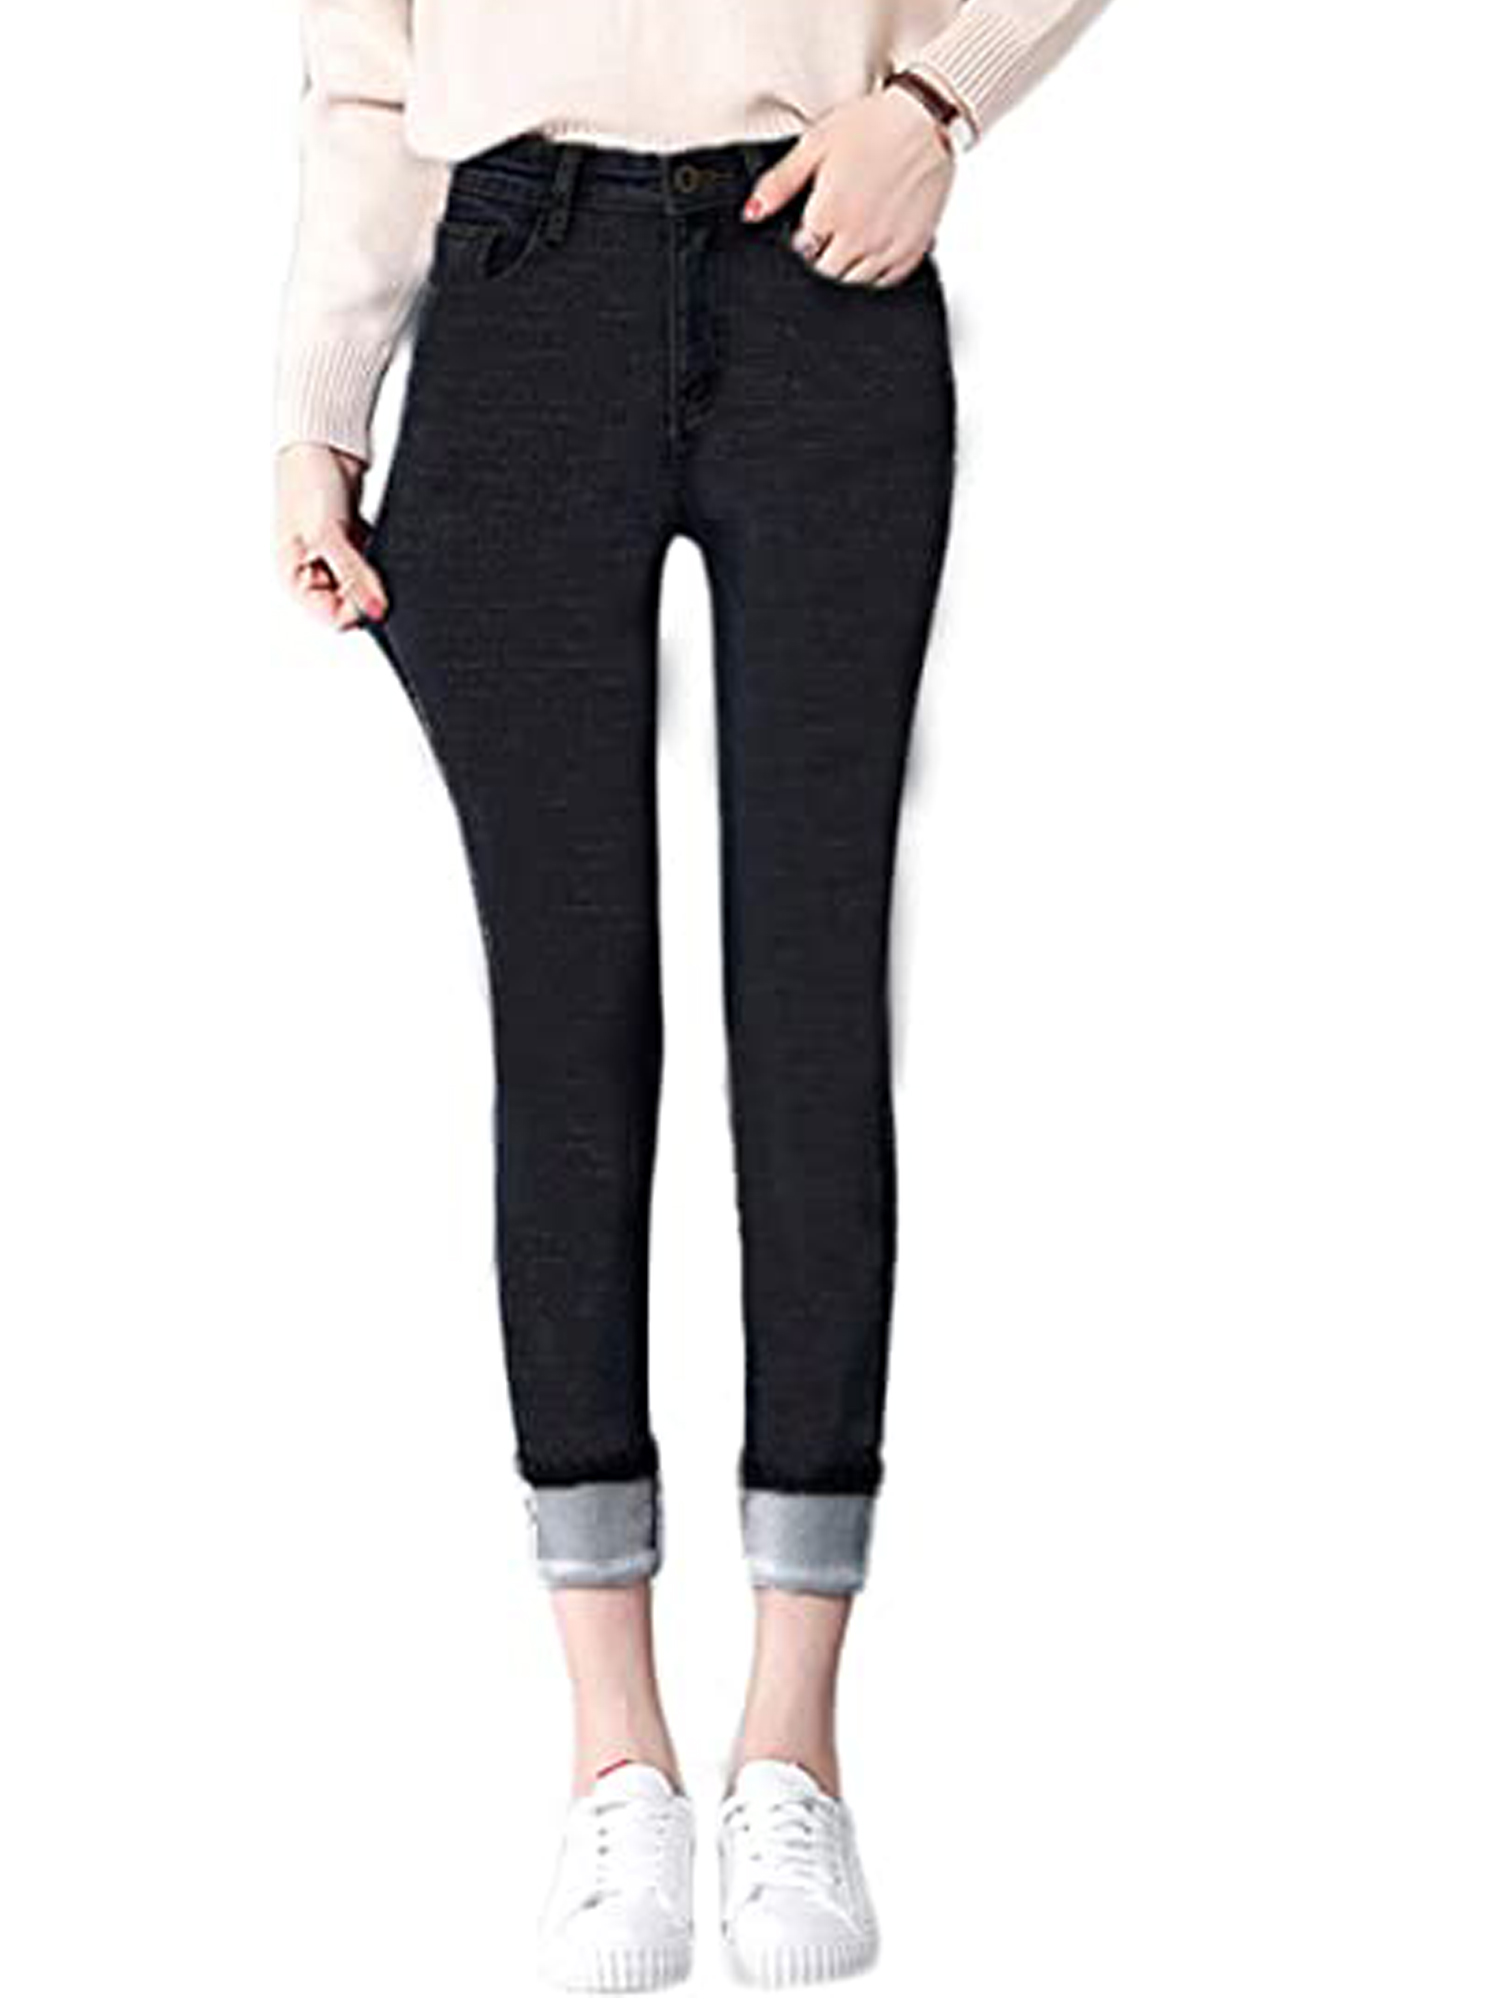 JBEELATE Women's Fleece Lined Jeans Stretchy Skinny Denim Pants with Pockets - image 1 of 6